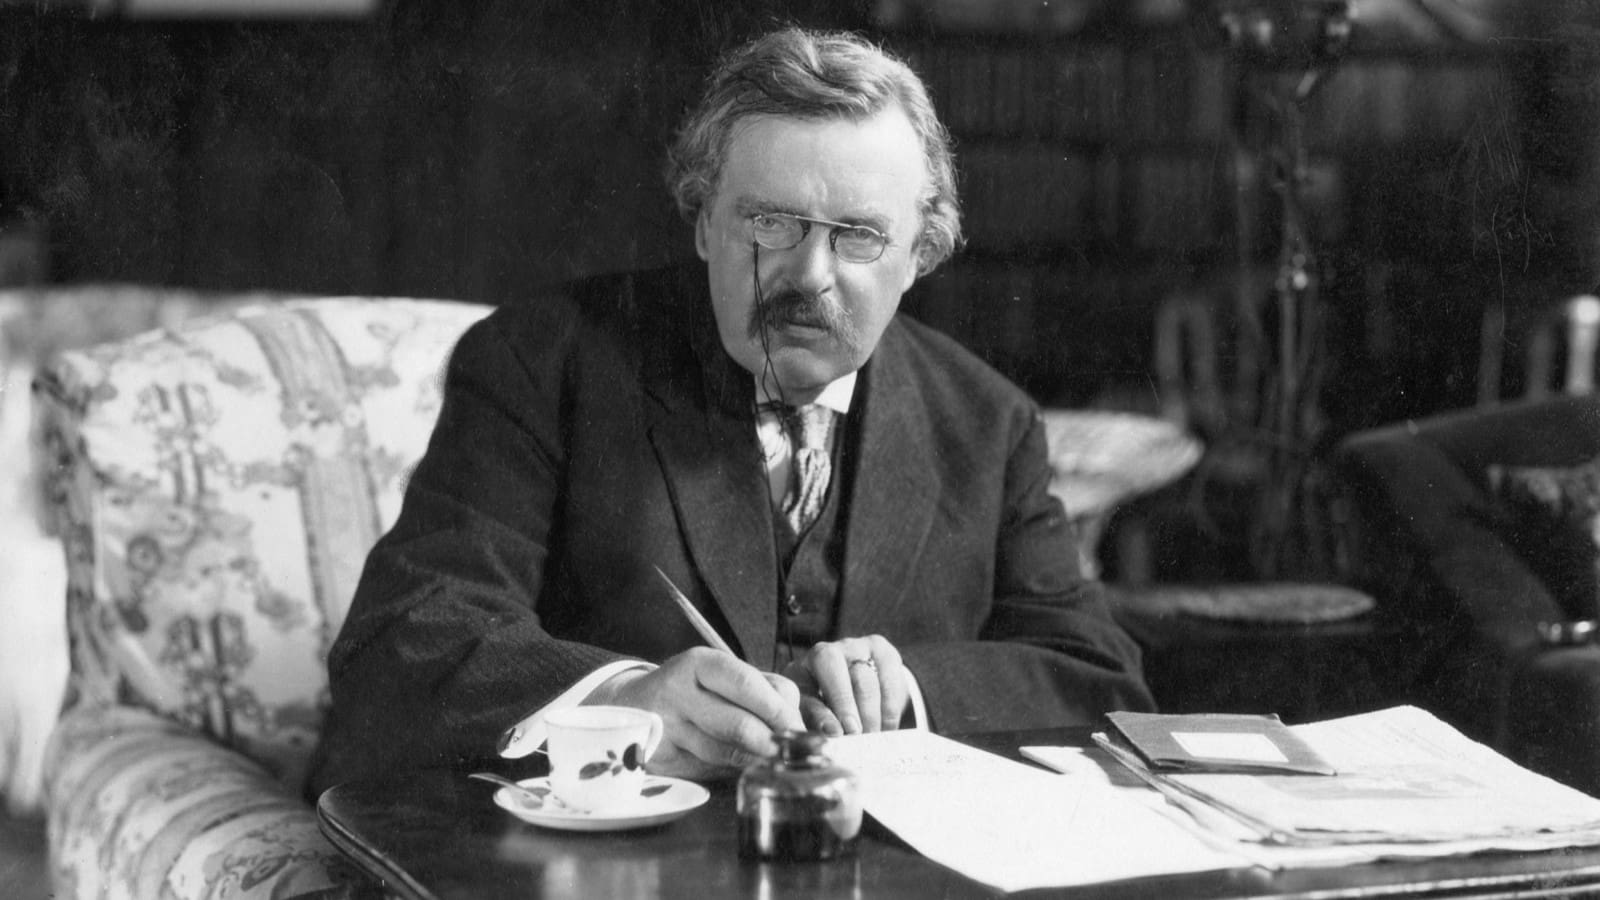 G. K. Chesterton at work (unknown author, prior to 1928).